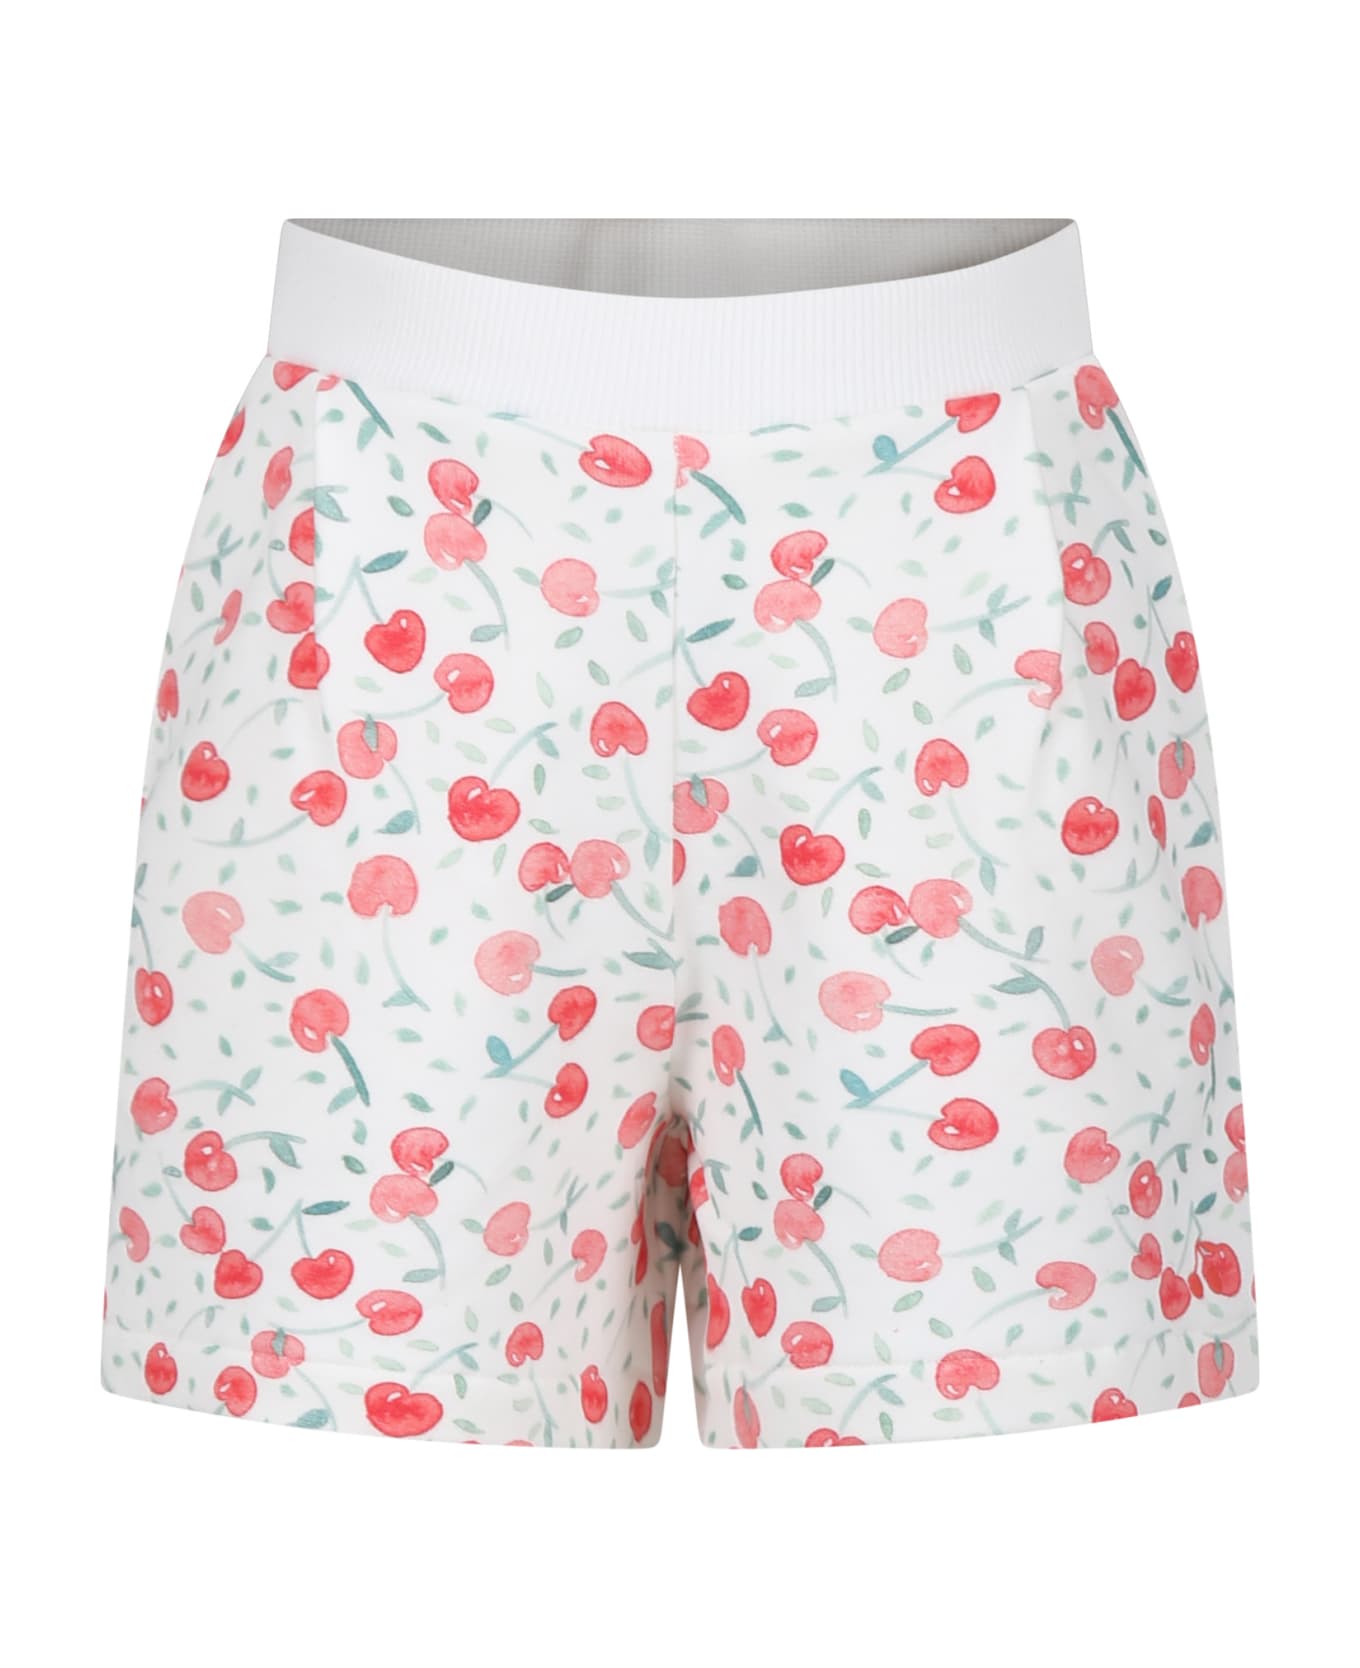 Bonpoint Ivory Sports Shorts For Girl With Cherries - WHITE